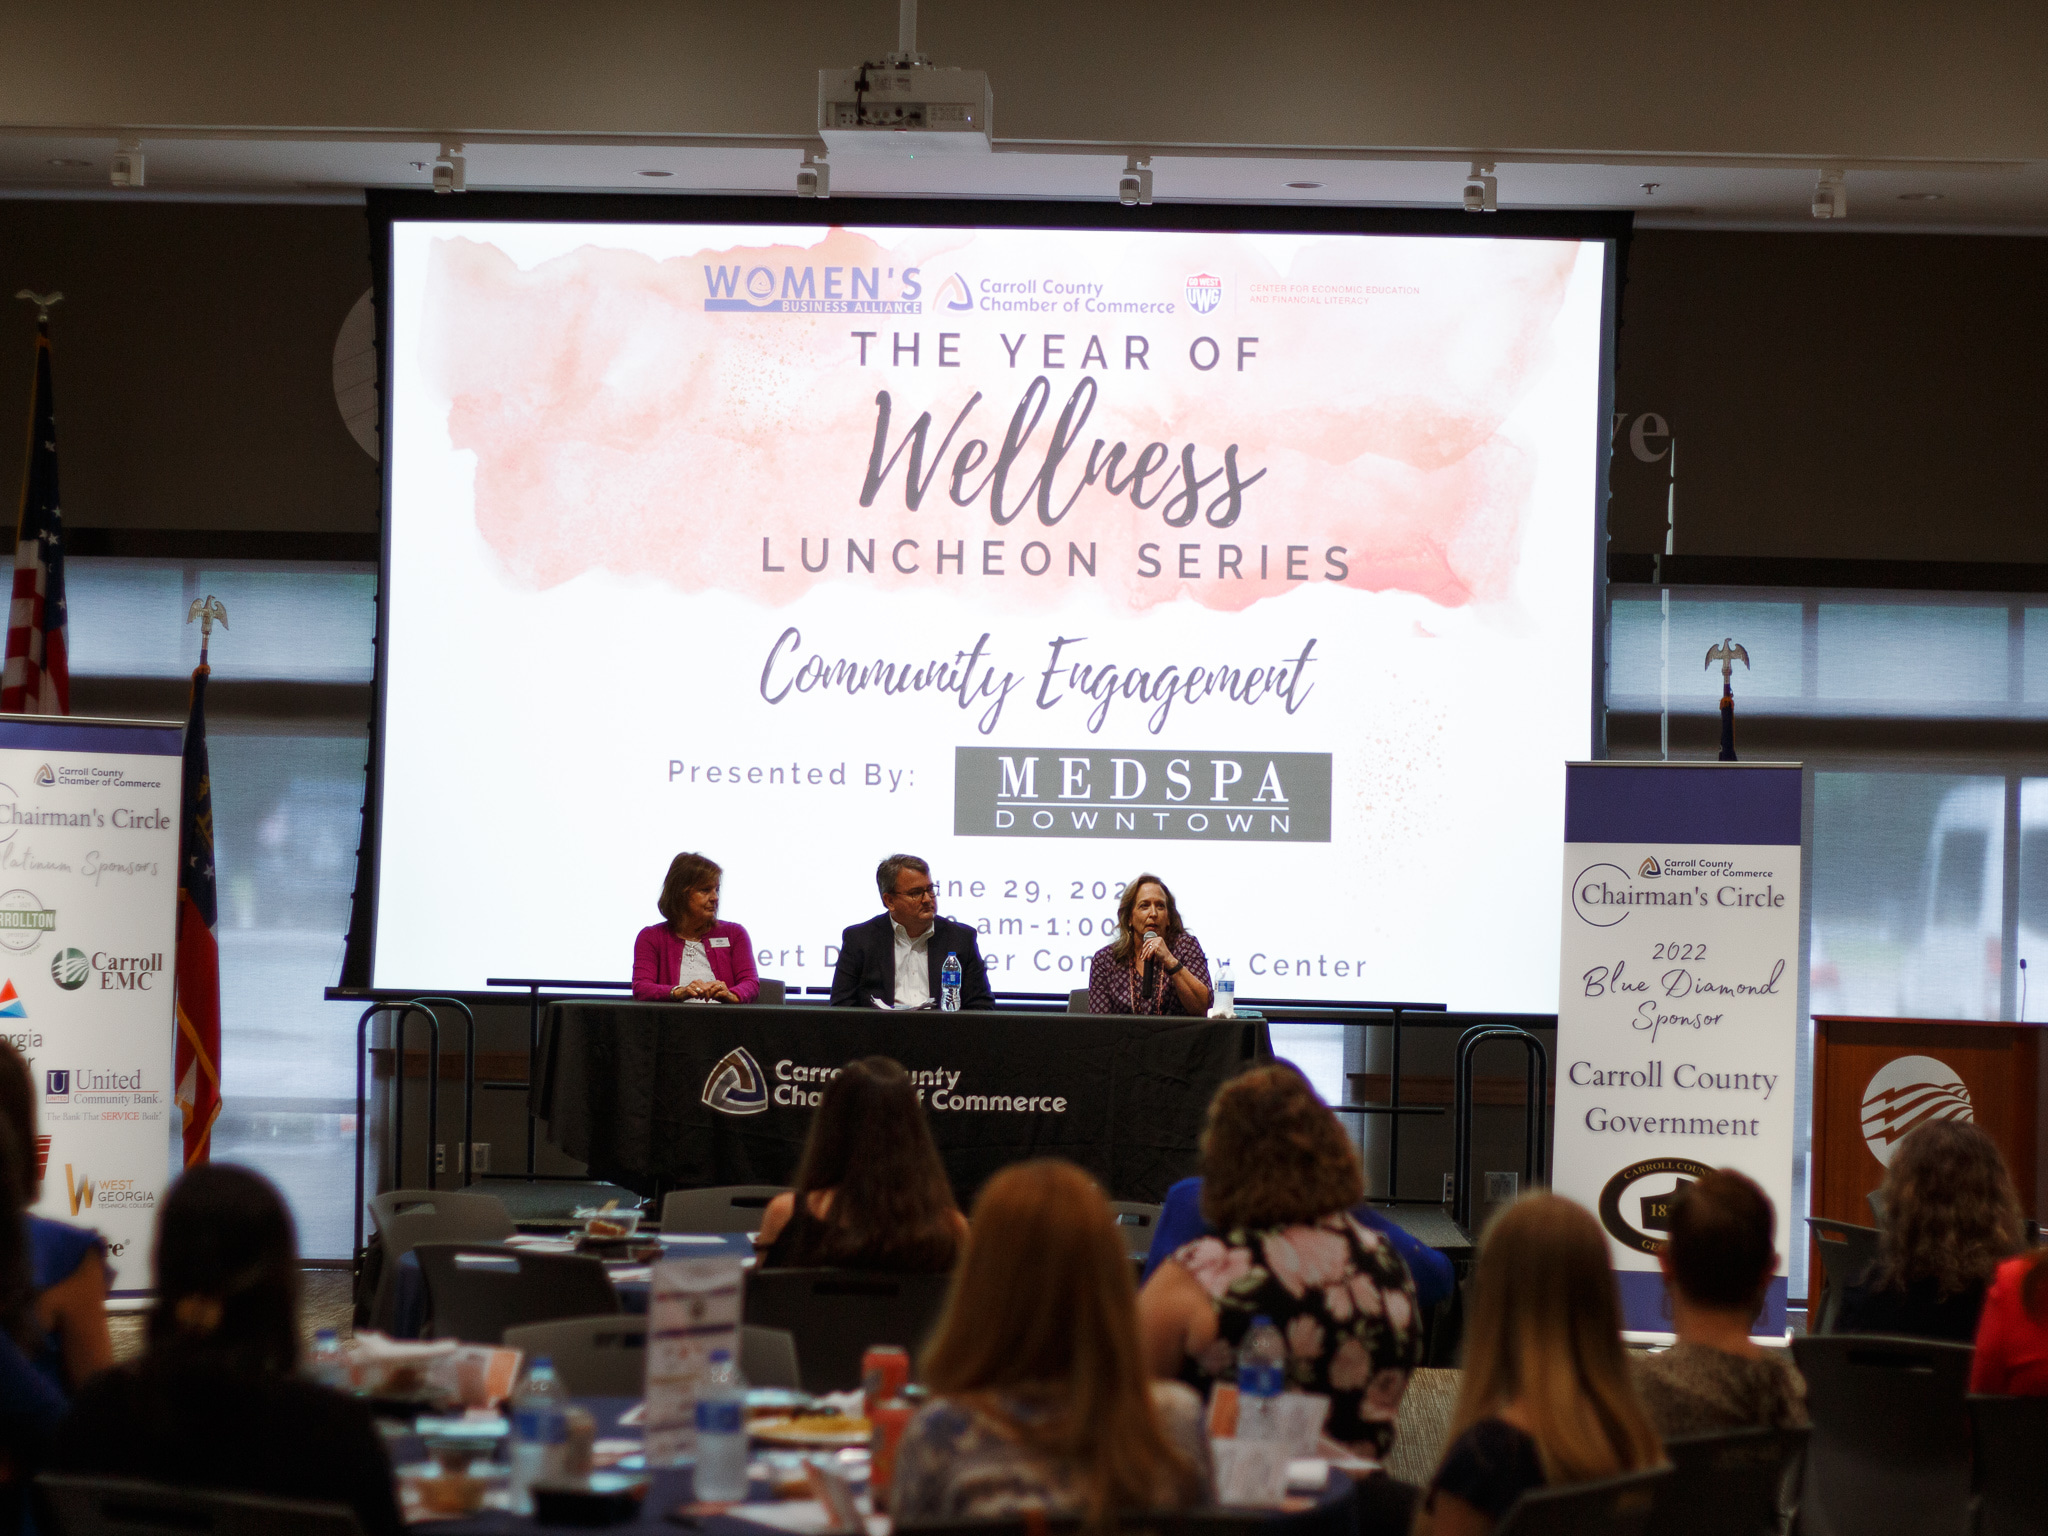 Presenters speaking at The Year of Wellness Luncheon Series.